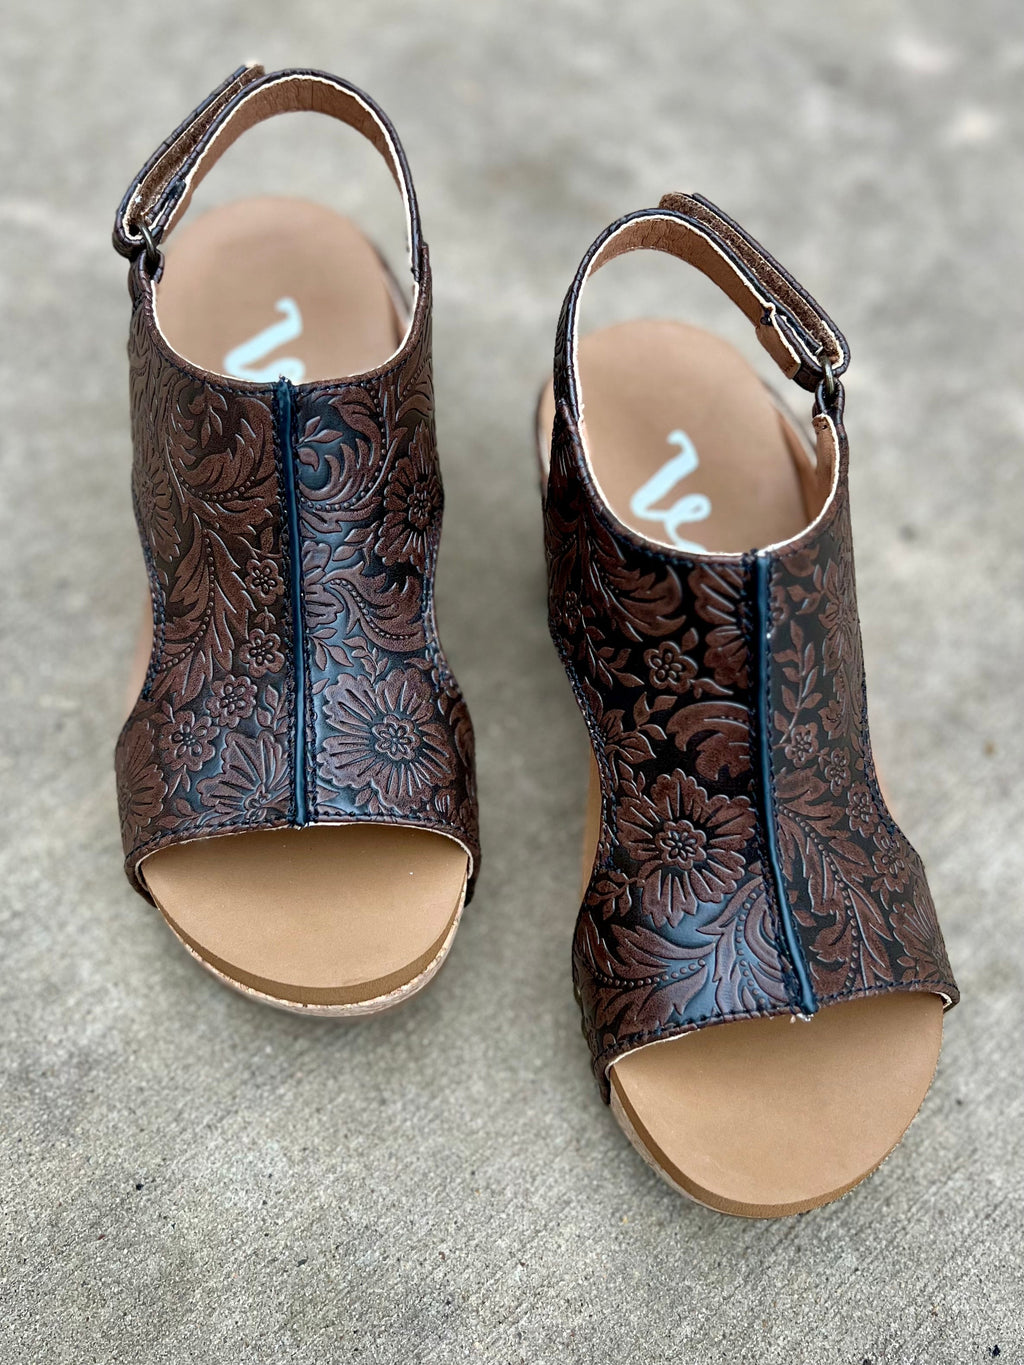 wedges, floral tooled, chocolate brown, strap, sandals. Get Gussied Up. Small Business. 